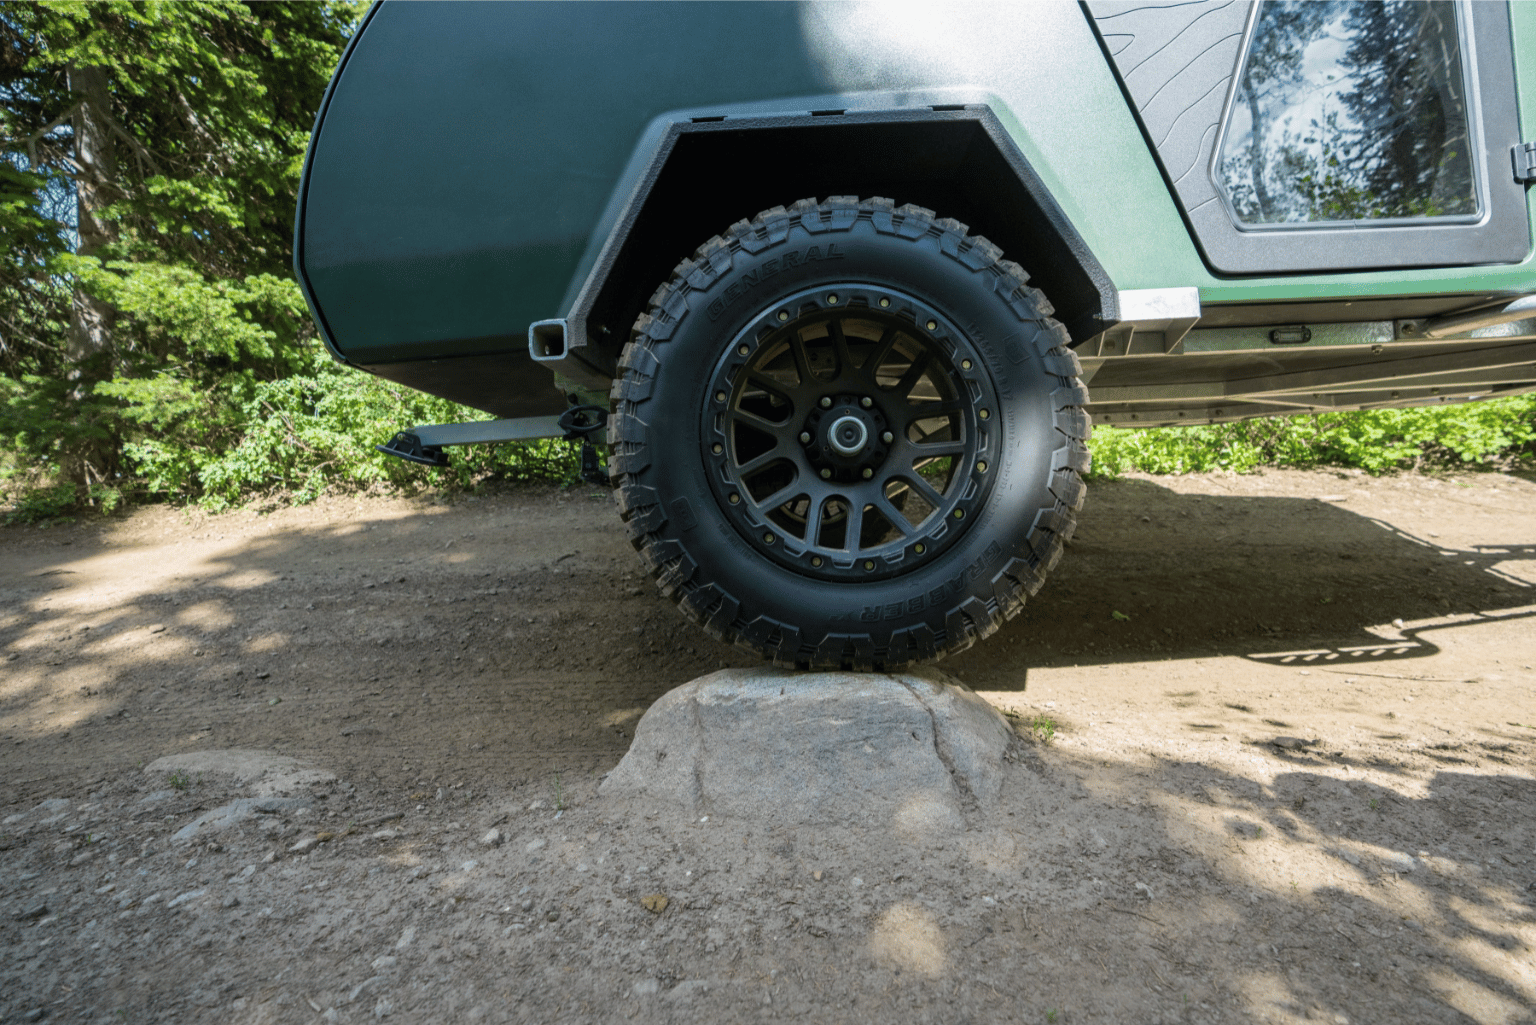 Offroad wheels and tires mounted on to a green teardrop trailer.